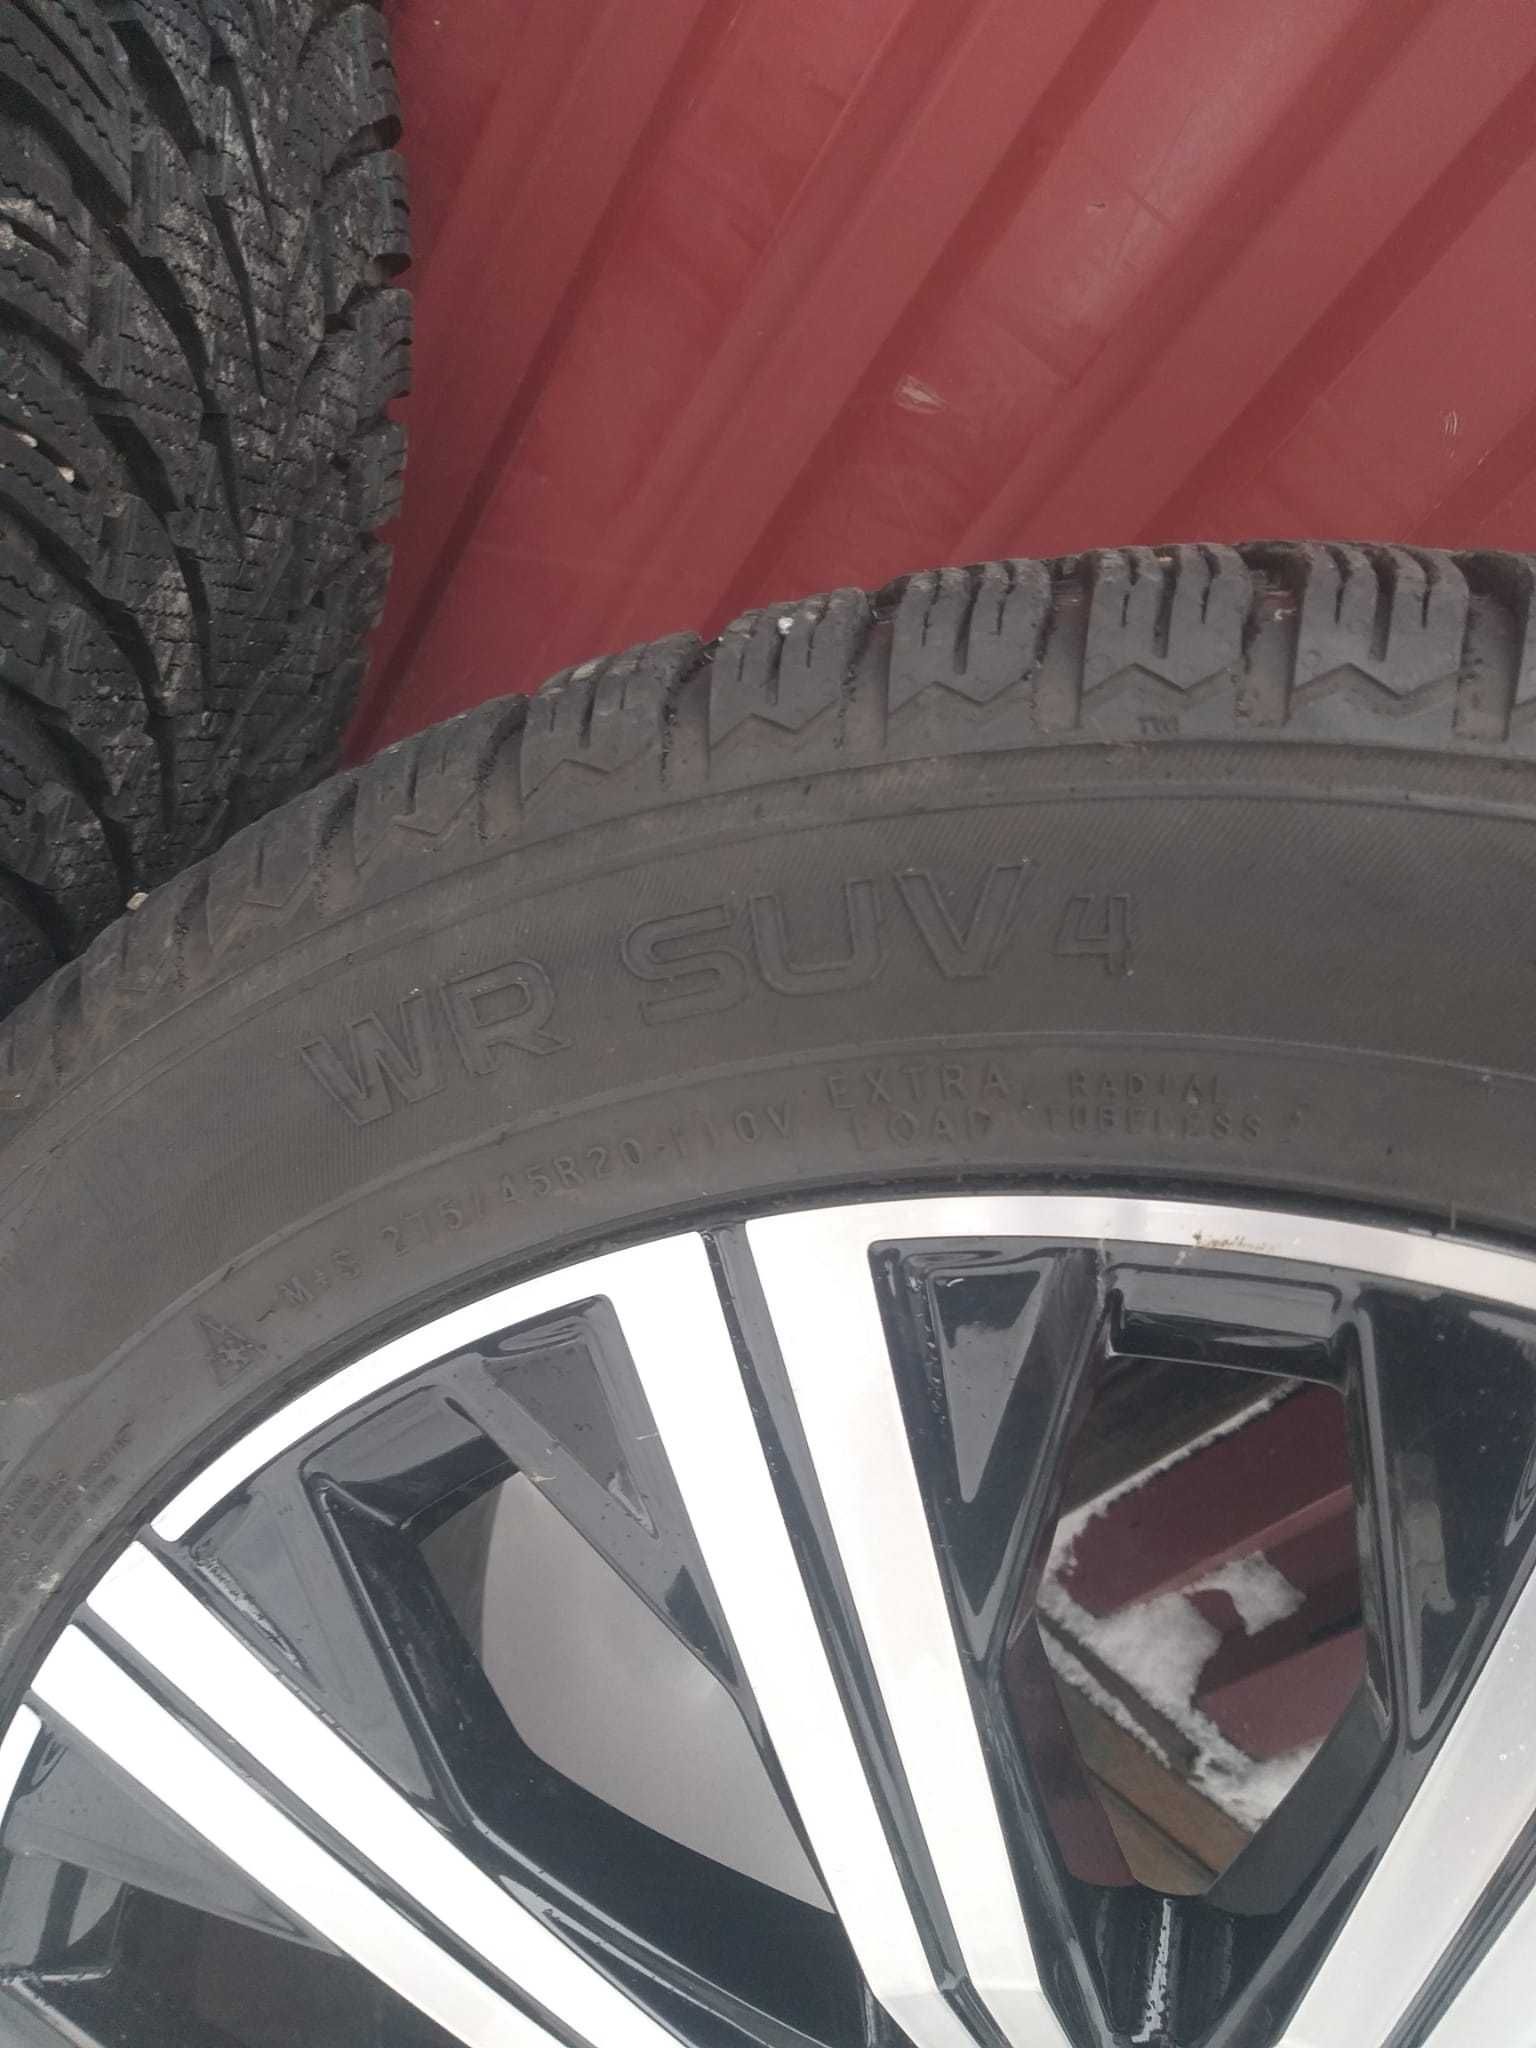 Set 4 Anvelope Iarna Nokian Tyres WR Suv 4 275 45 R20 An 2021